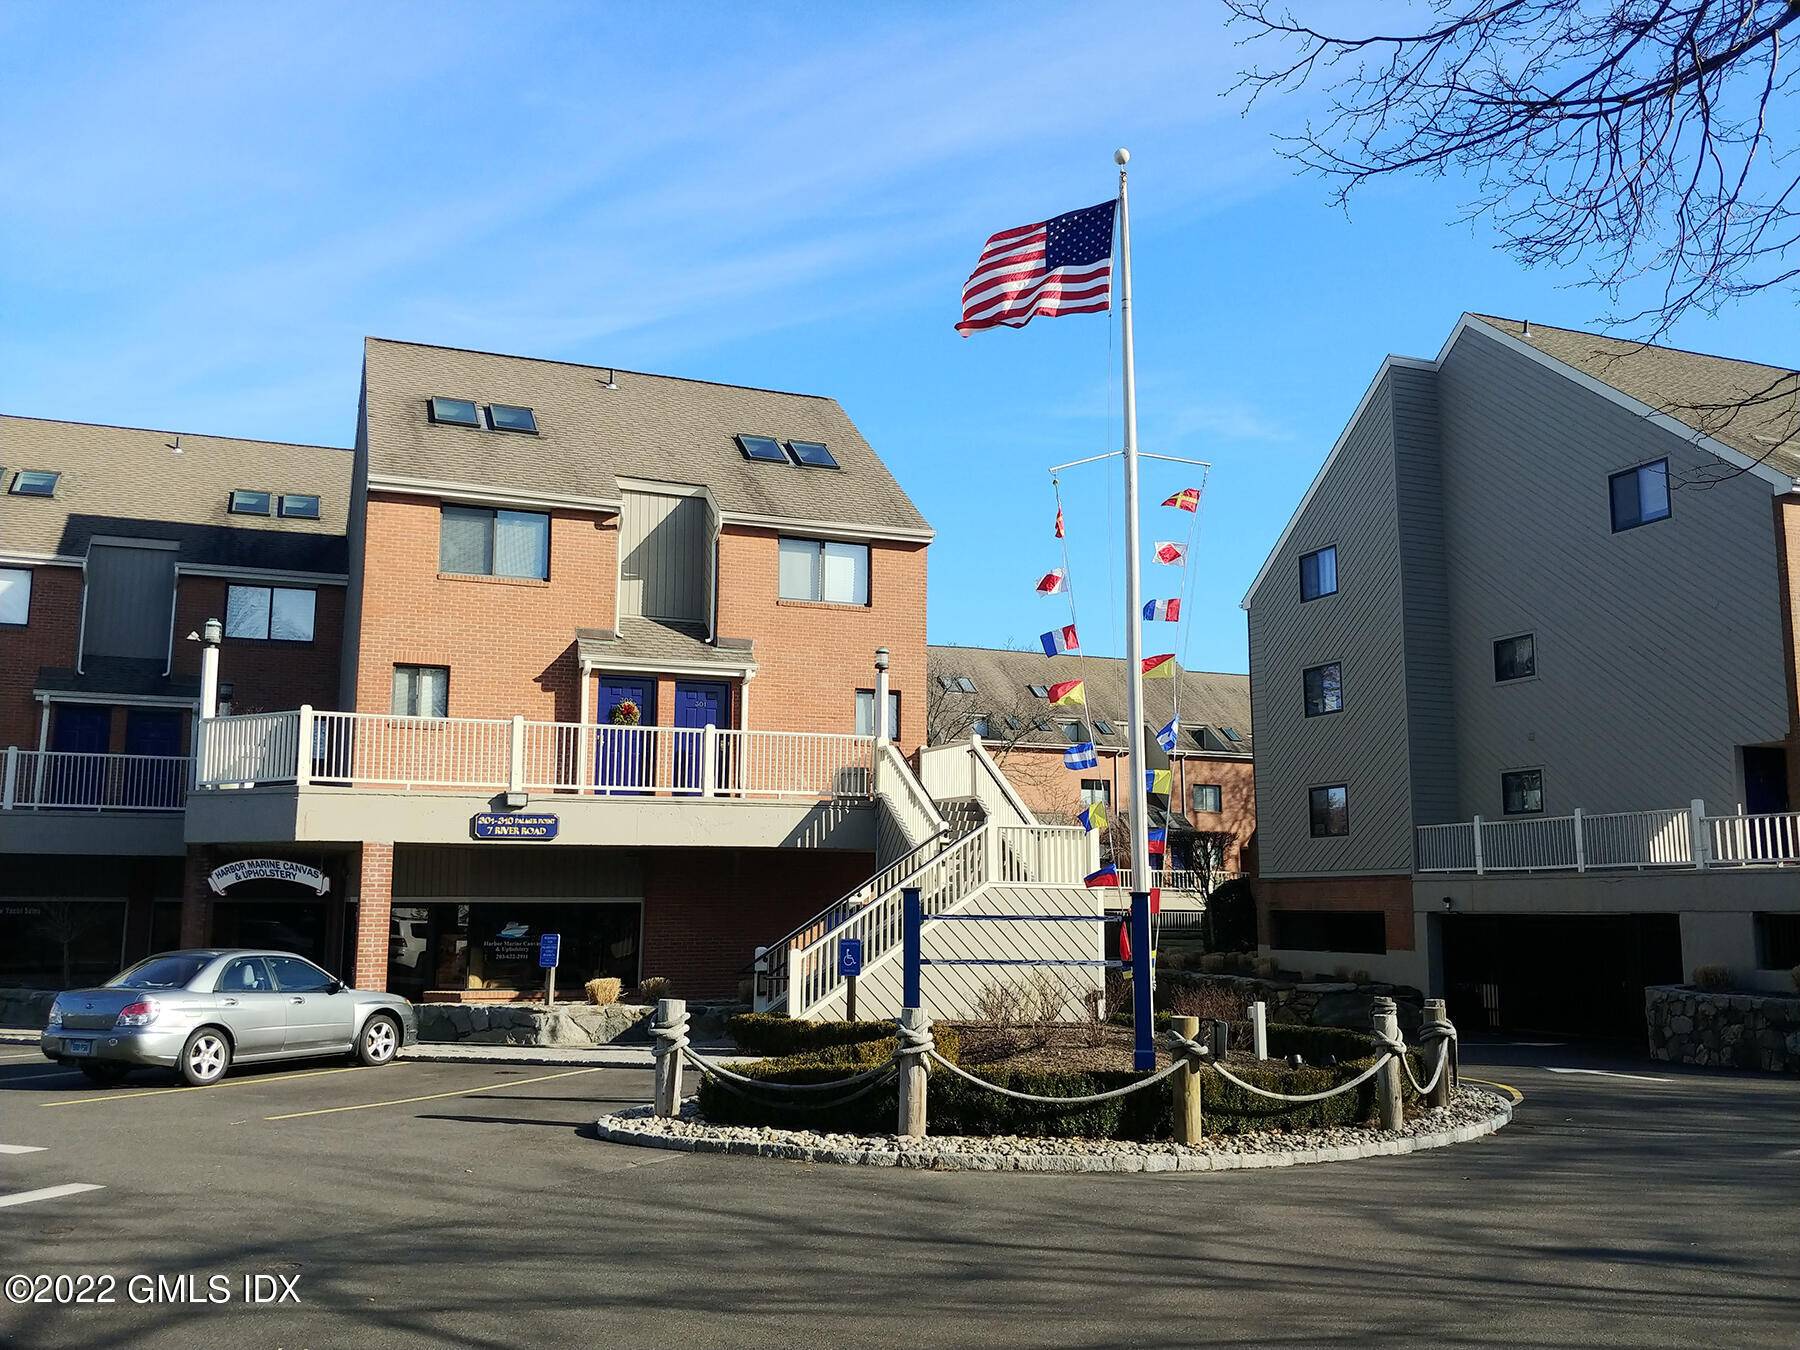 High Quality Condominium Townhouse, in a desirable complex on the waterfront in Greenwich Cos Cob, offered for a long term lease.